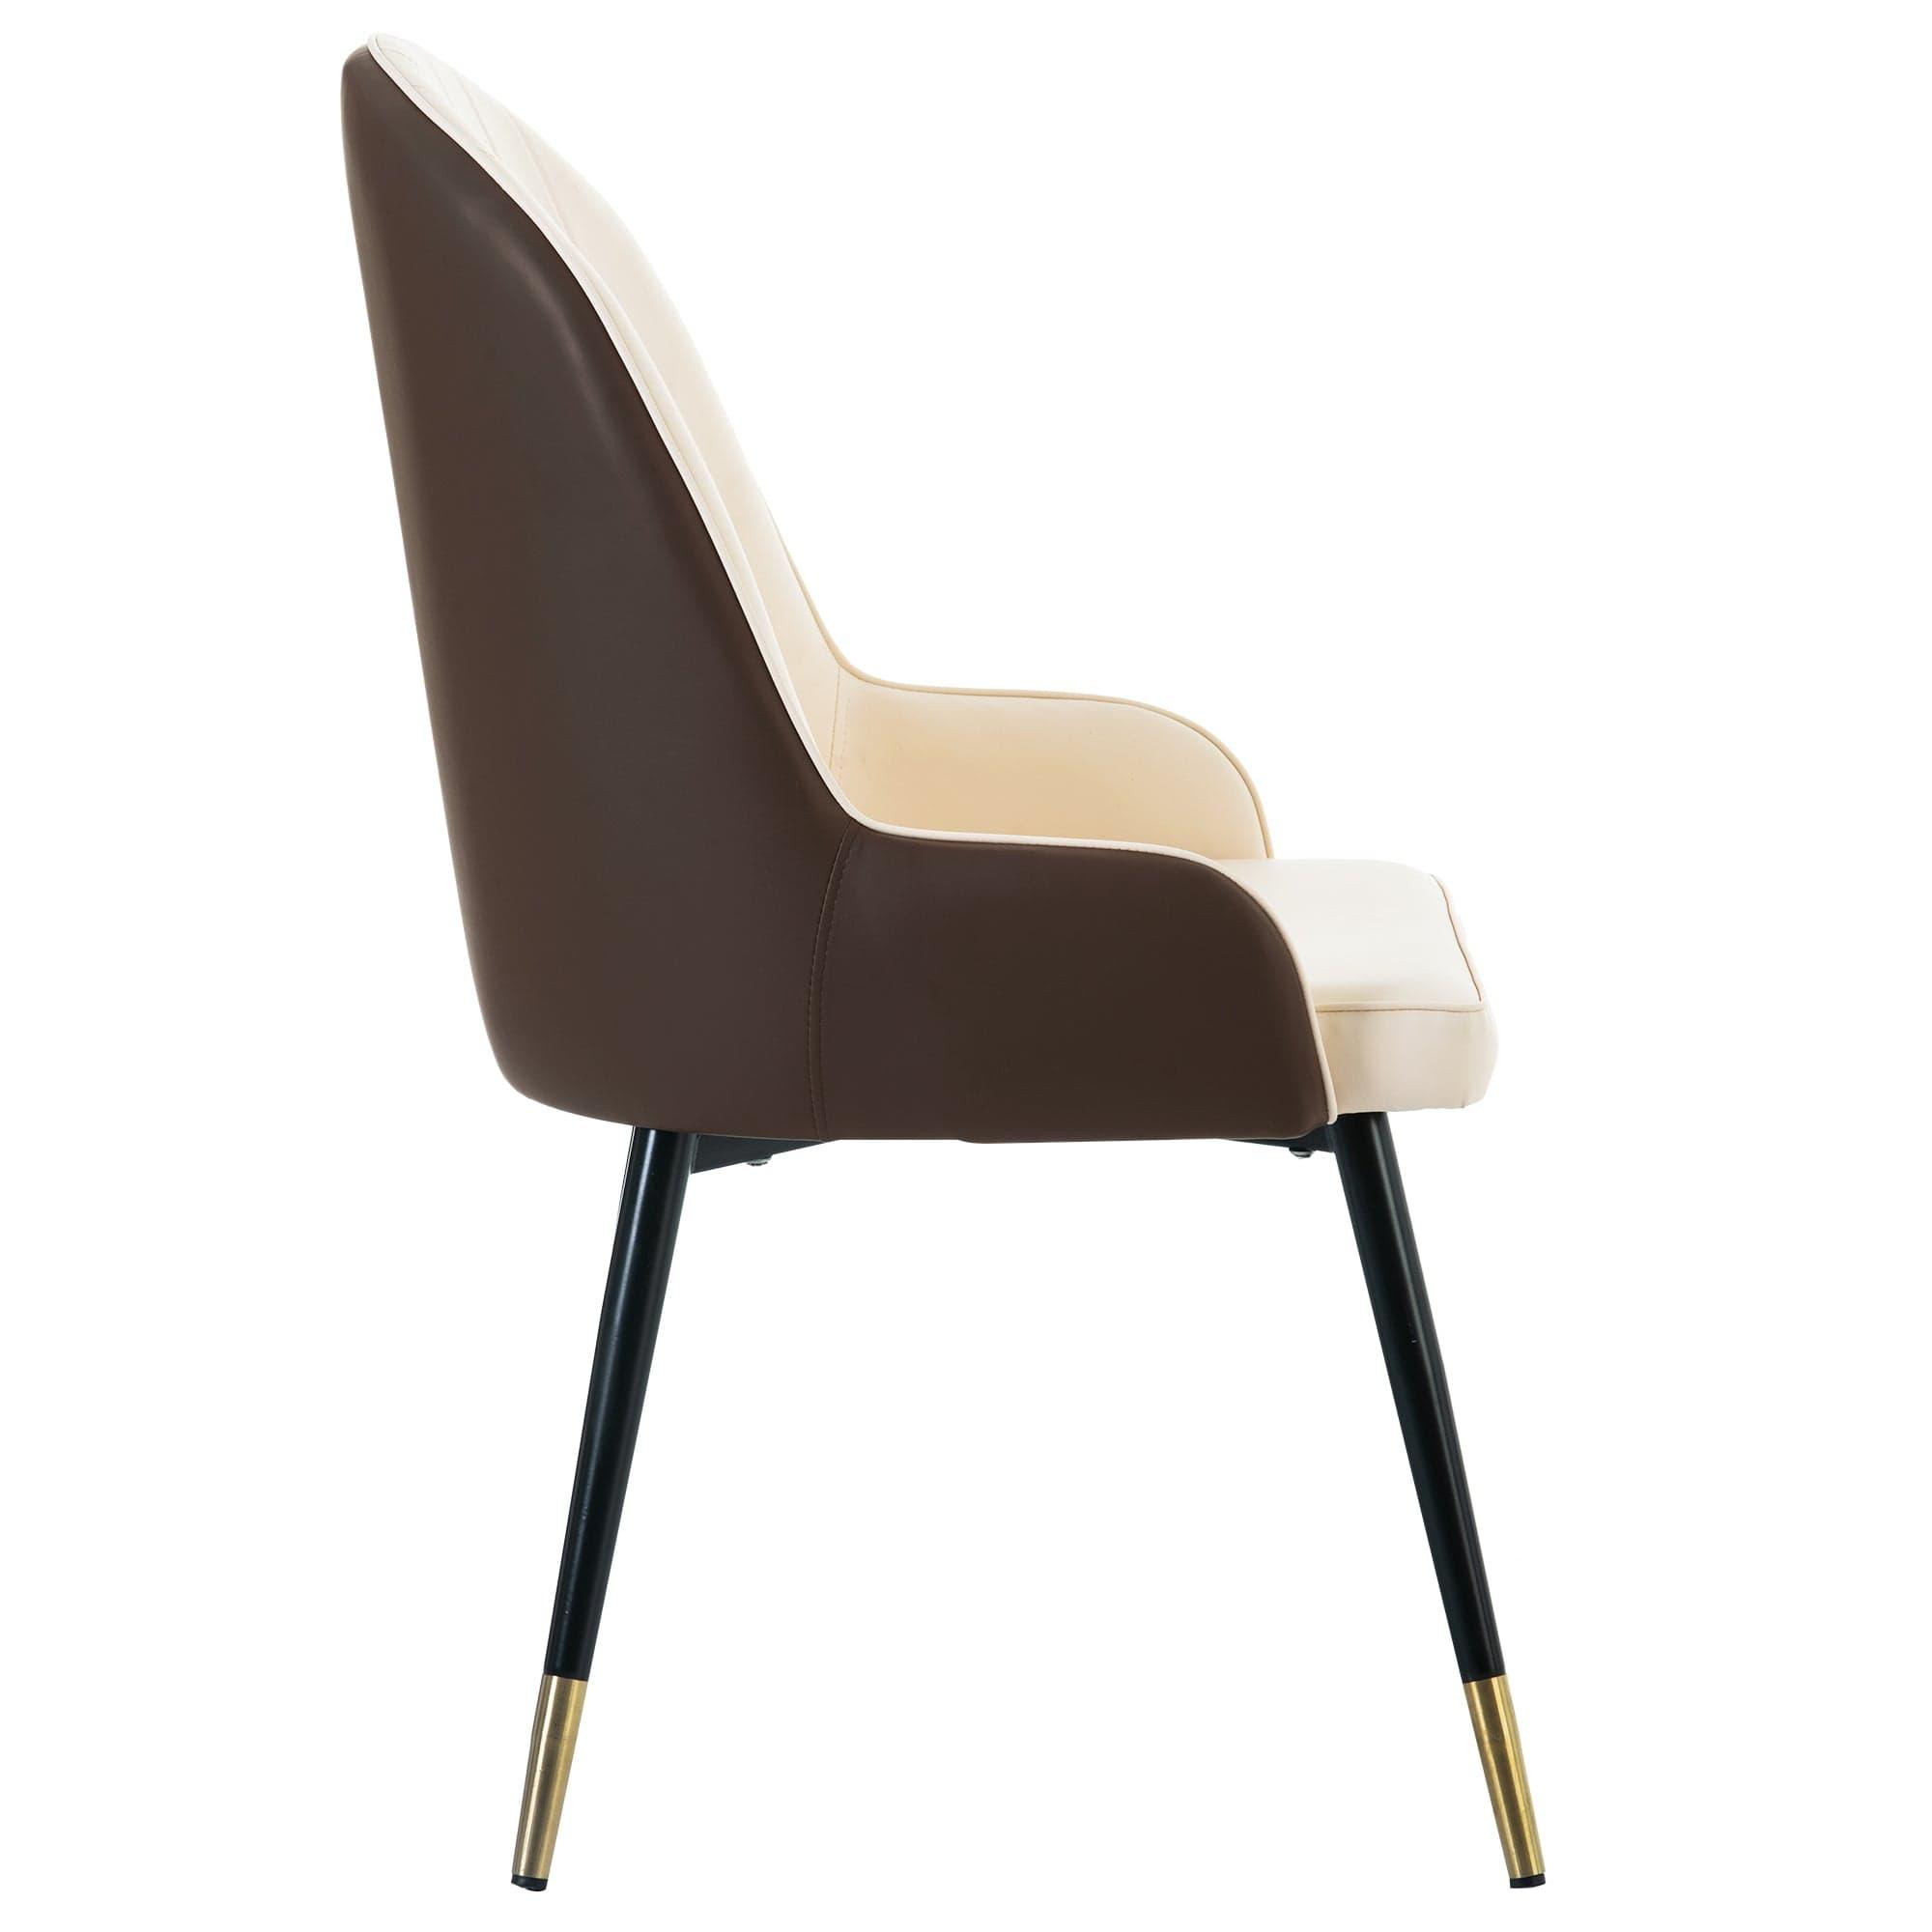 Shop TREXM Modern Style Wing-chair Curved PU Leather Dining Chair with Two Armrests and Metal Legs  (Brown) Mademoiselle Home Decor